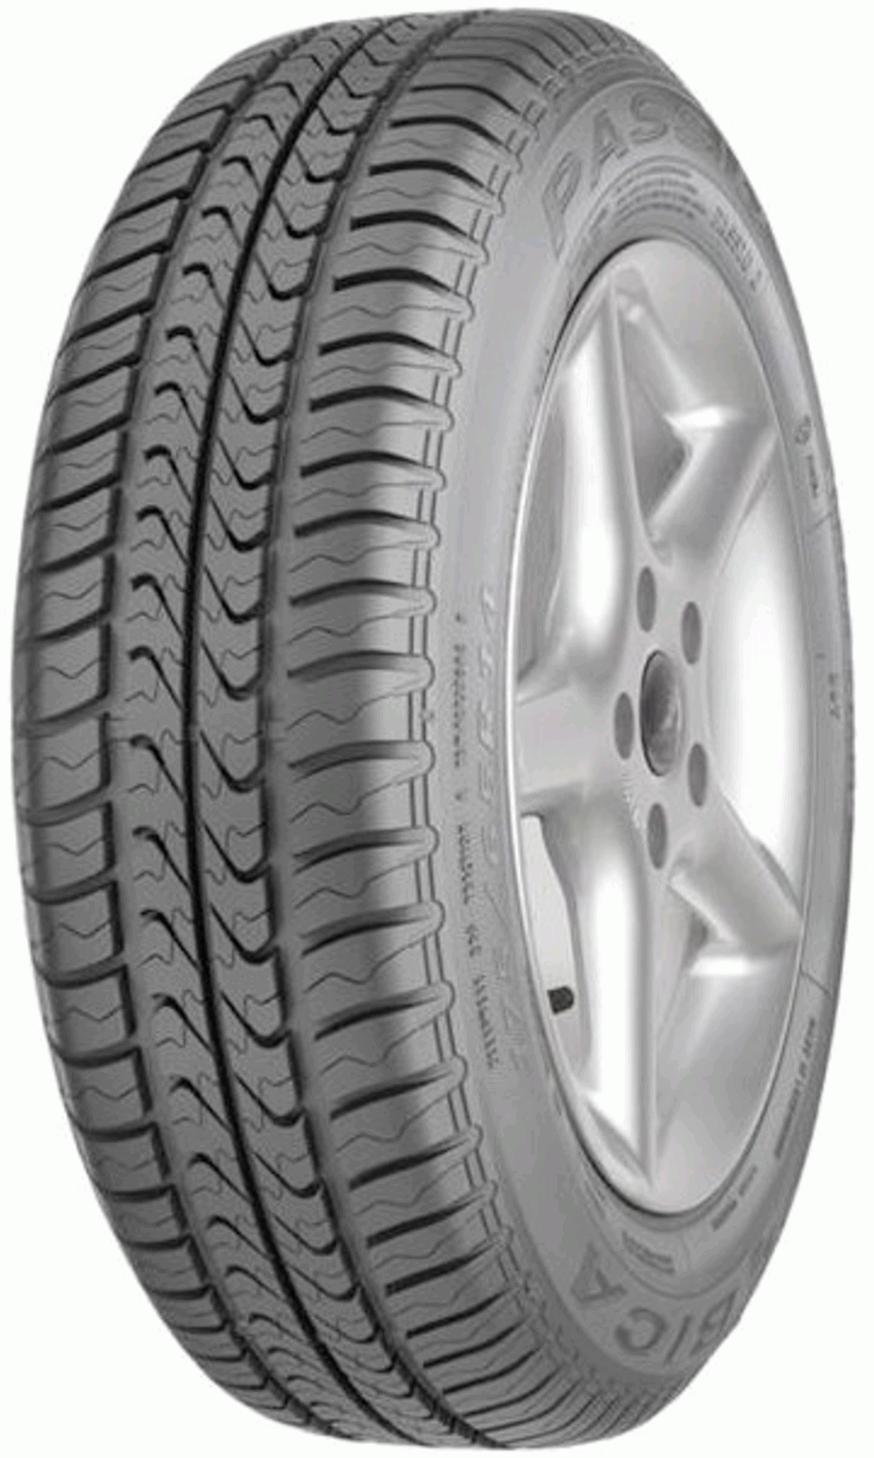 debica-passio-2-tyre-reviews-and-ratings